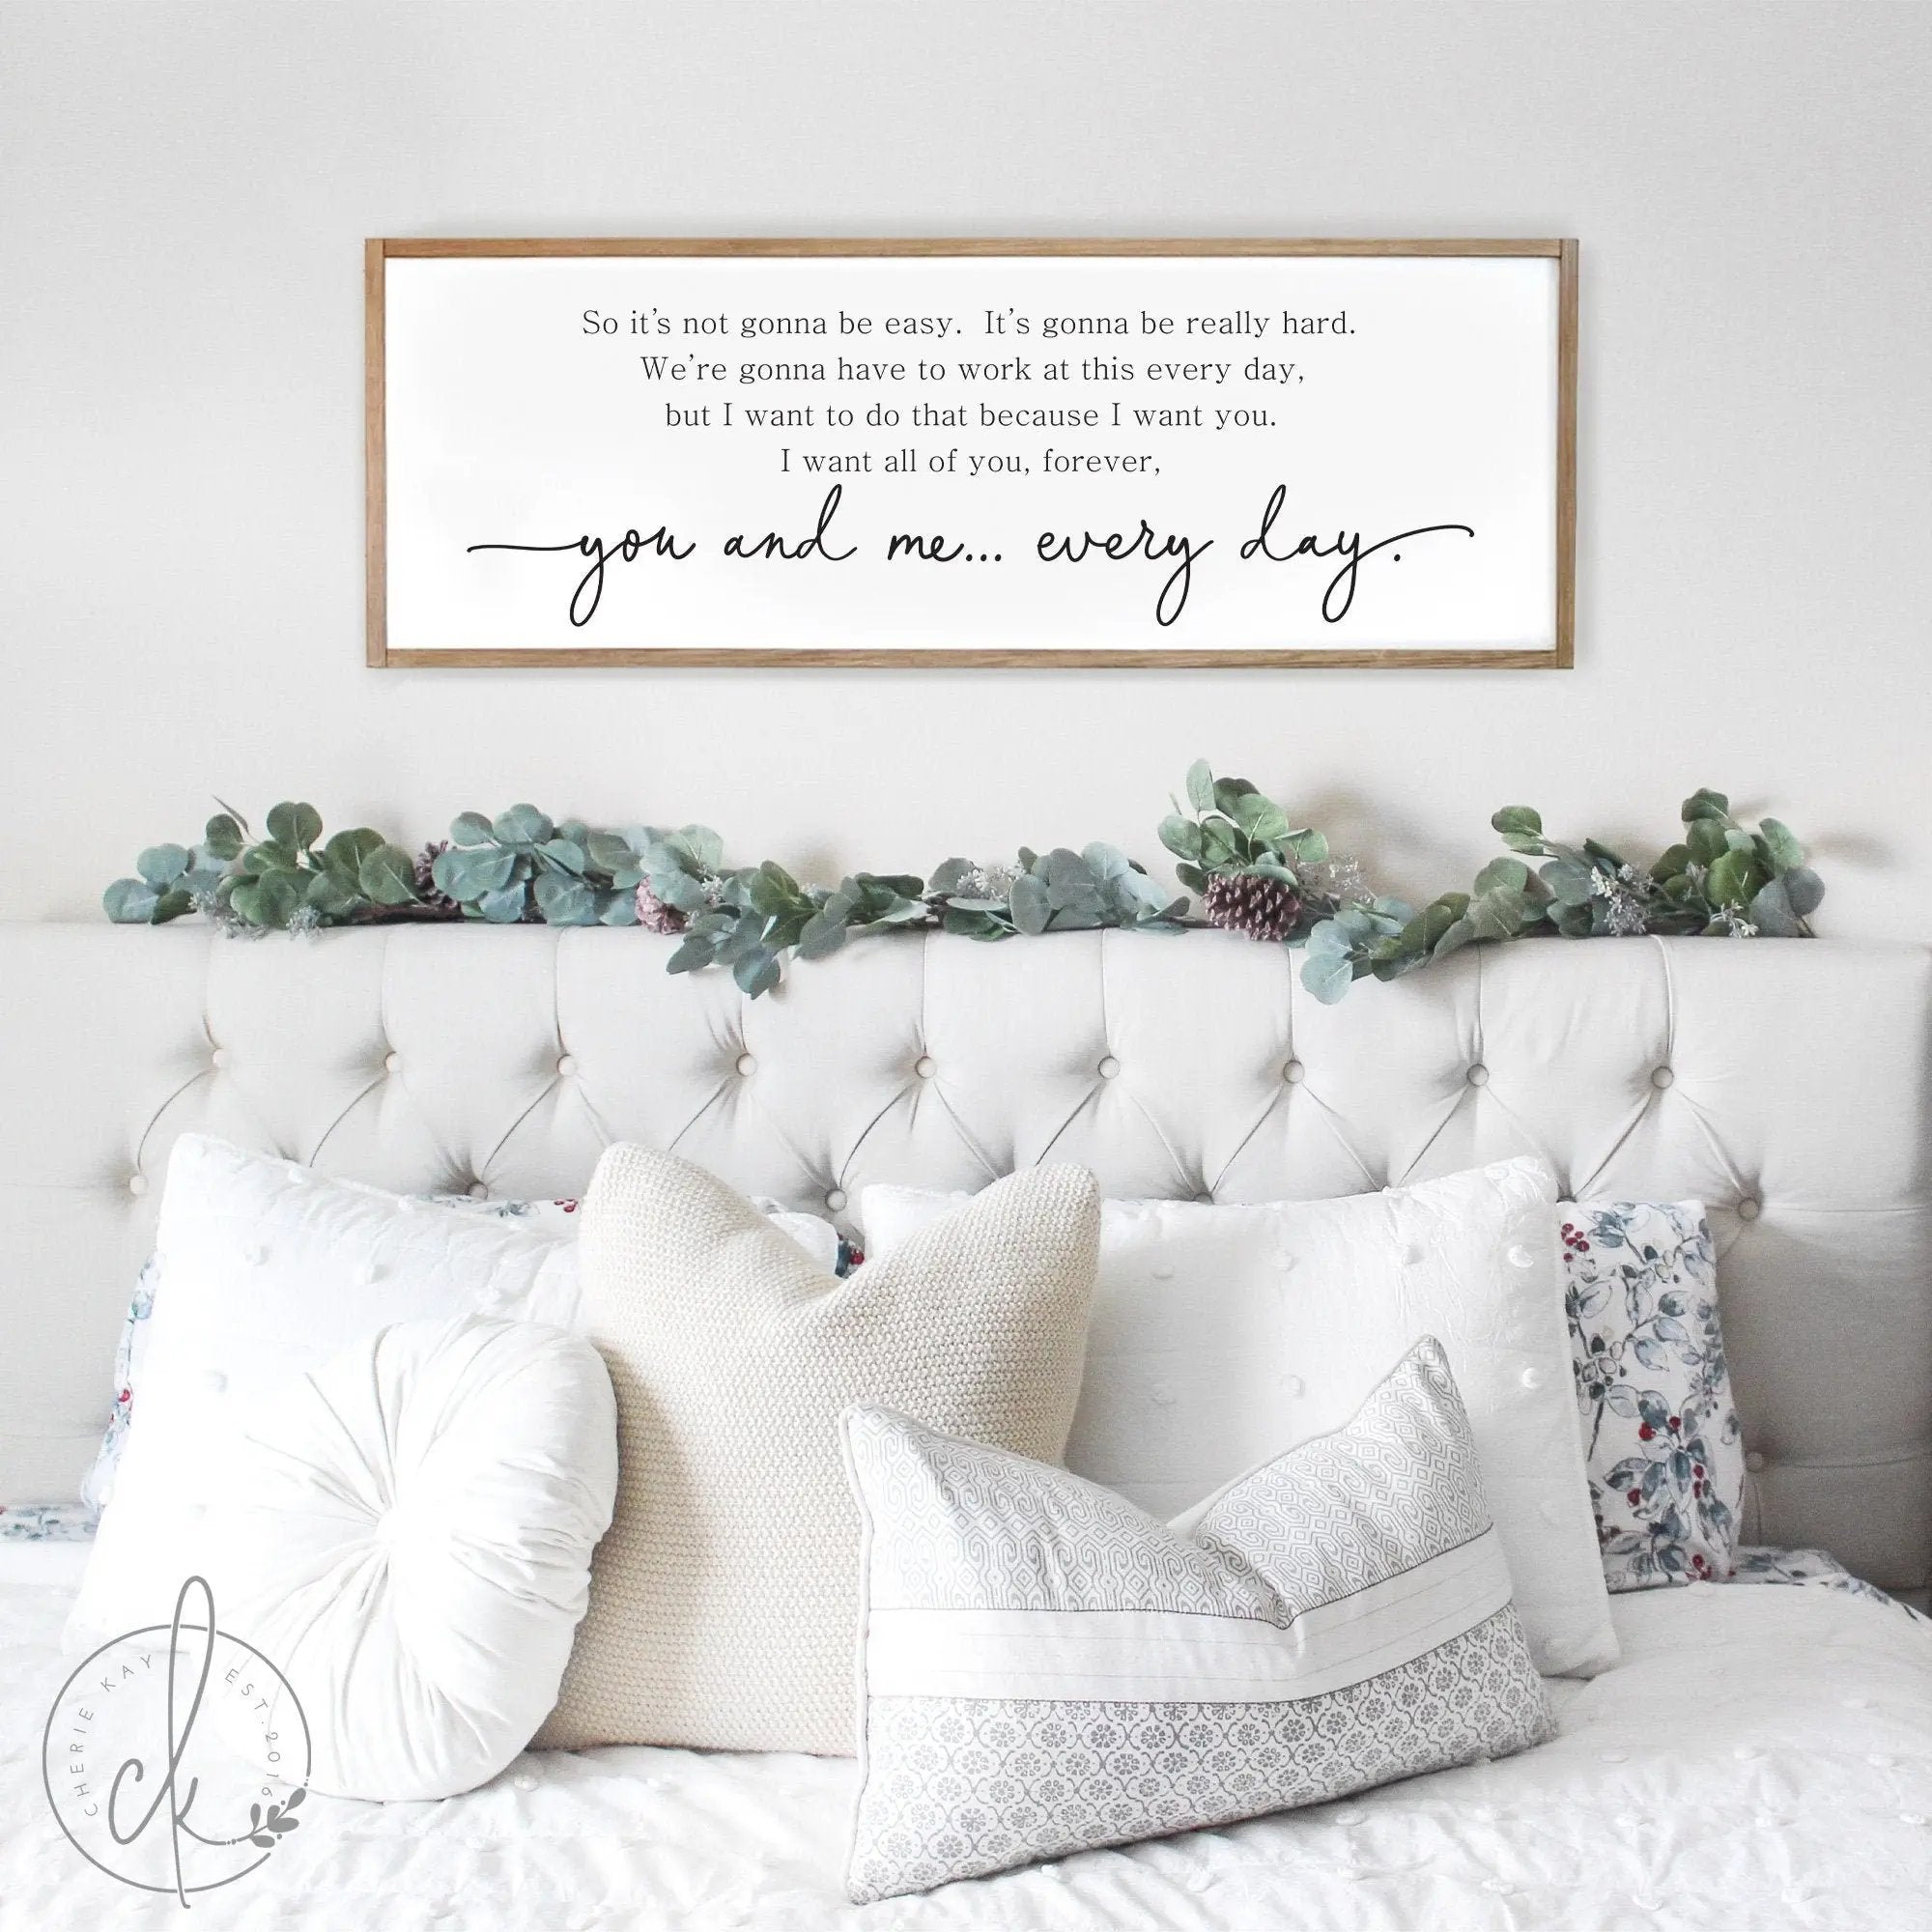 So it's not gonna be easy sign | master bedroom wall decor | master bedroom signs | sign for master bedroom | you and me every day sign